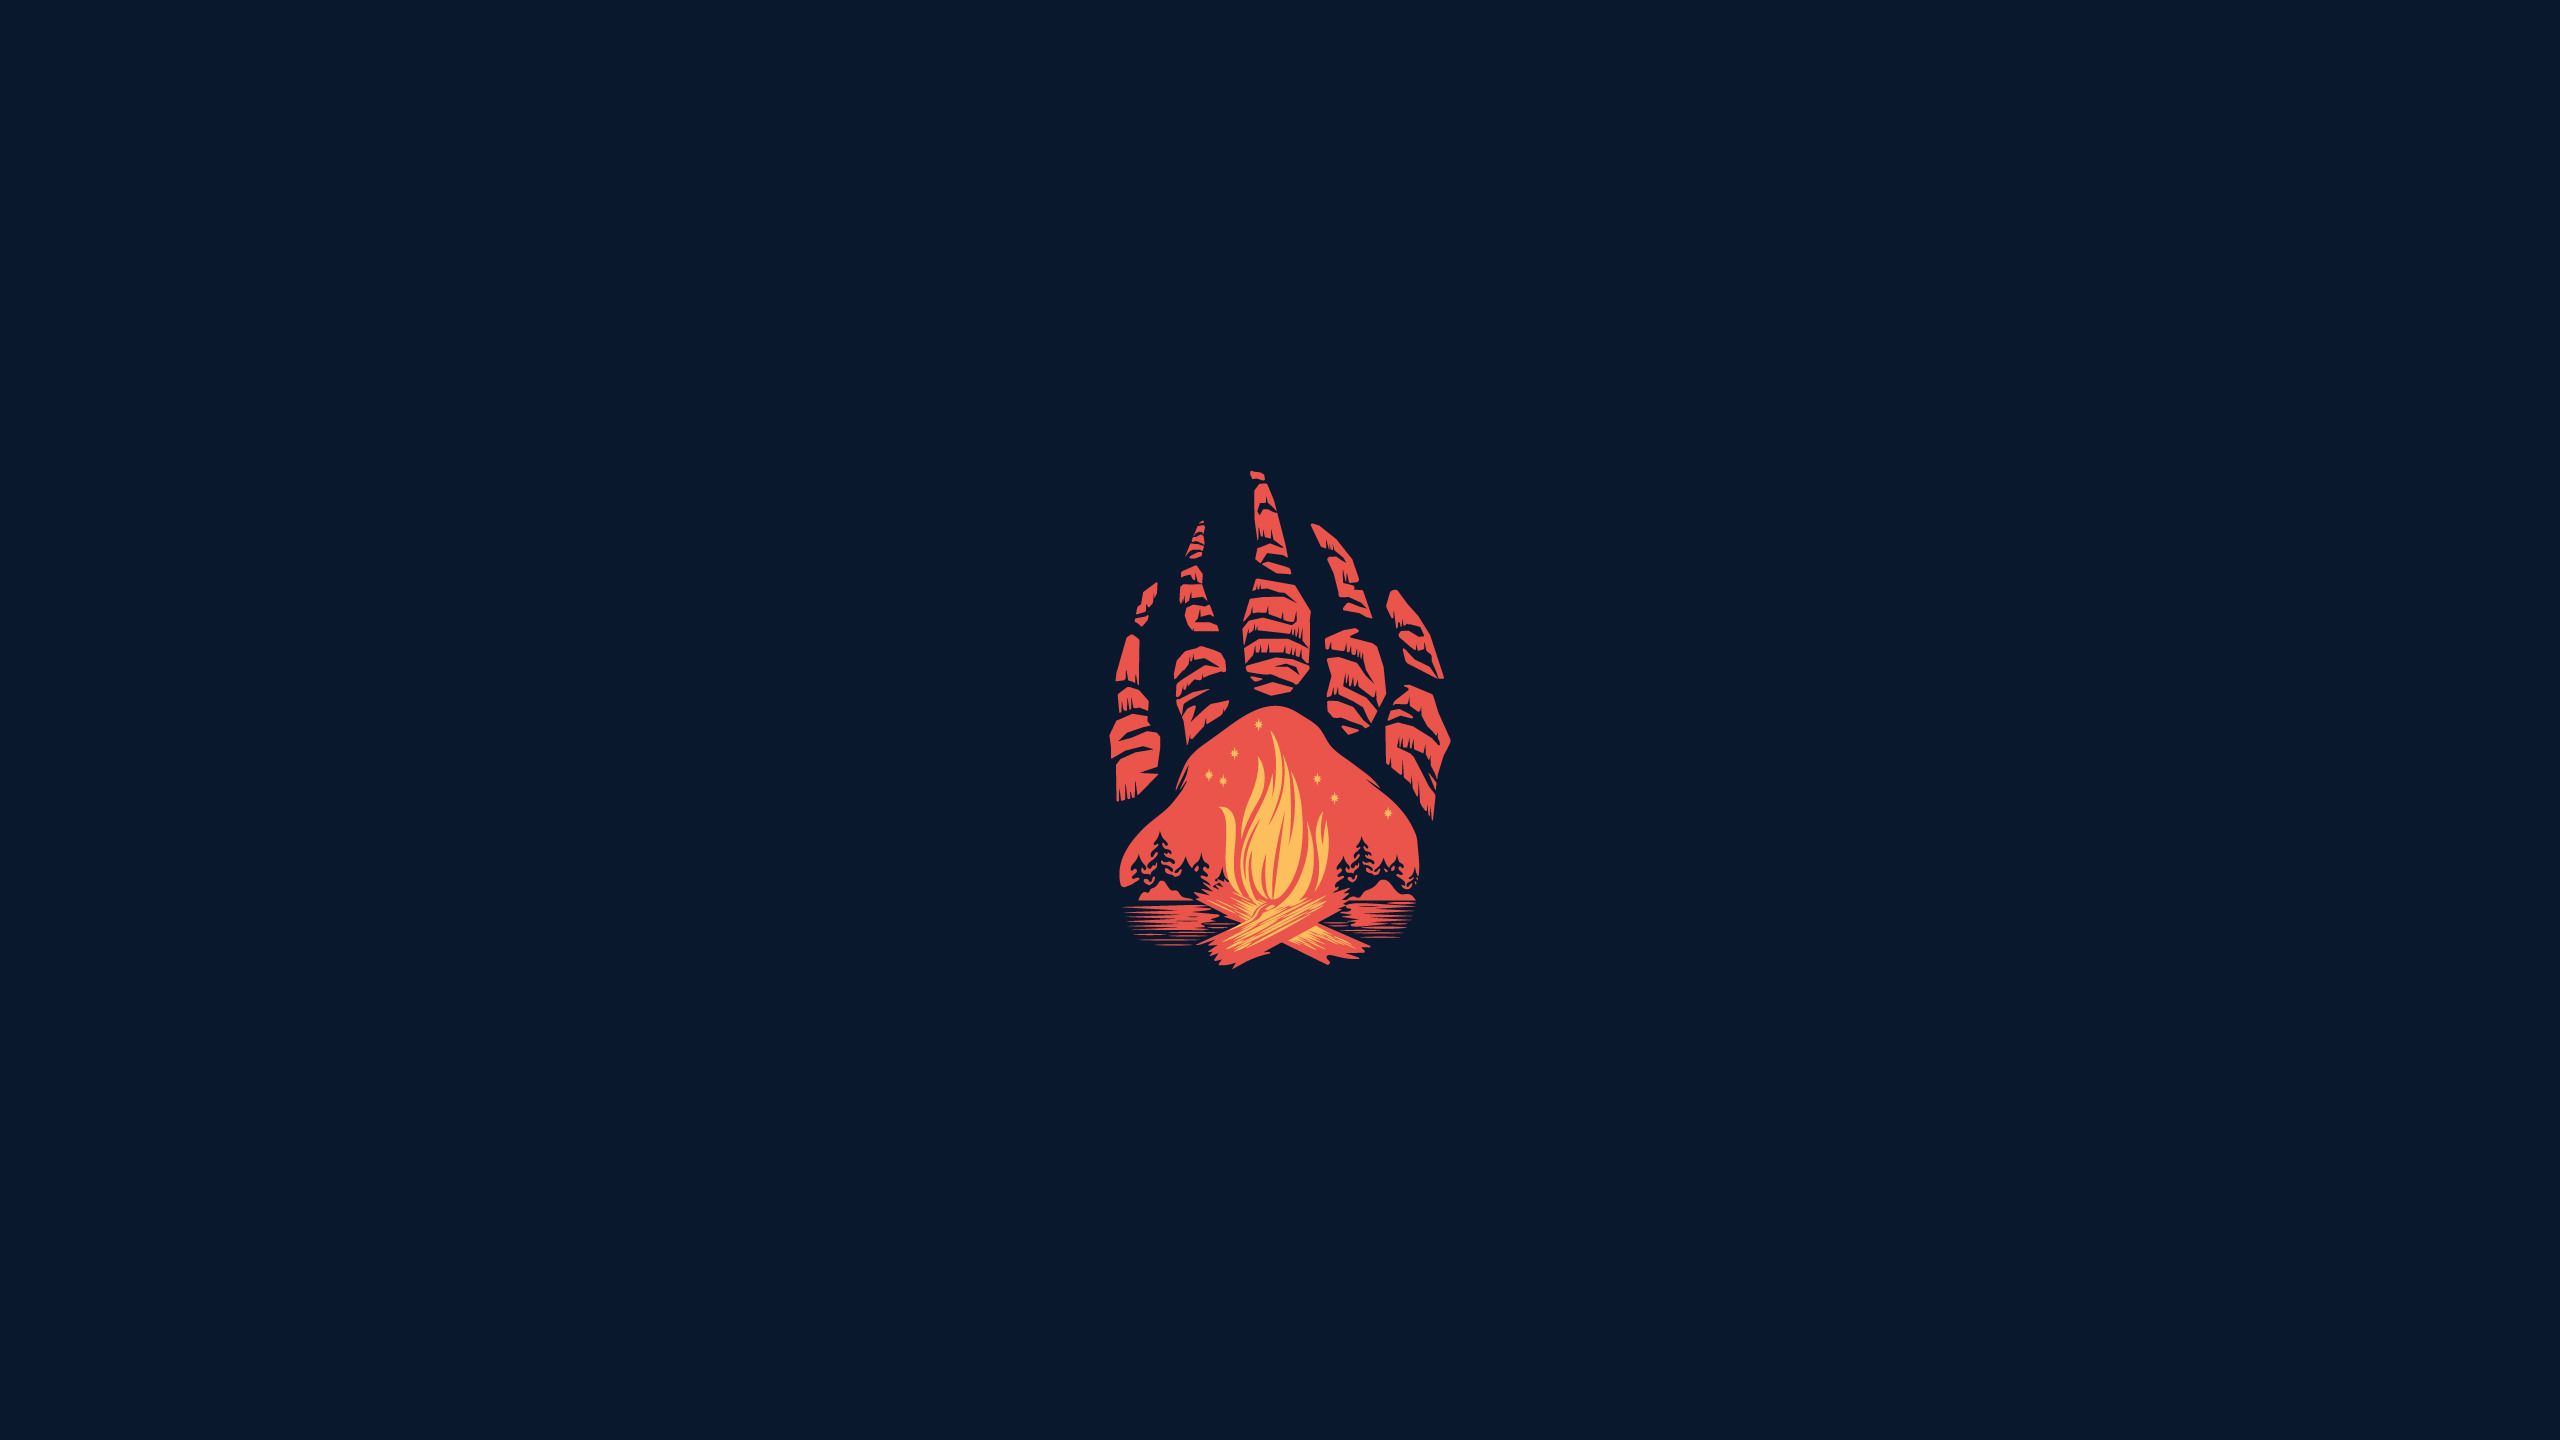 Download 2560x1440 wallpaper paws, campfire, minimal, abstract